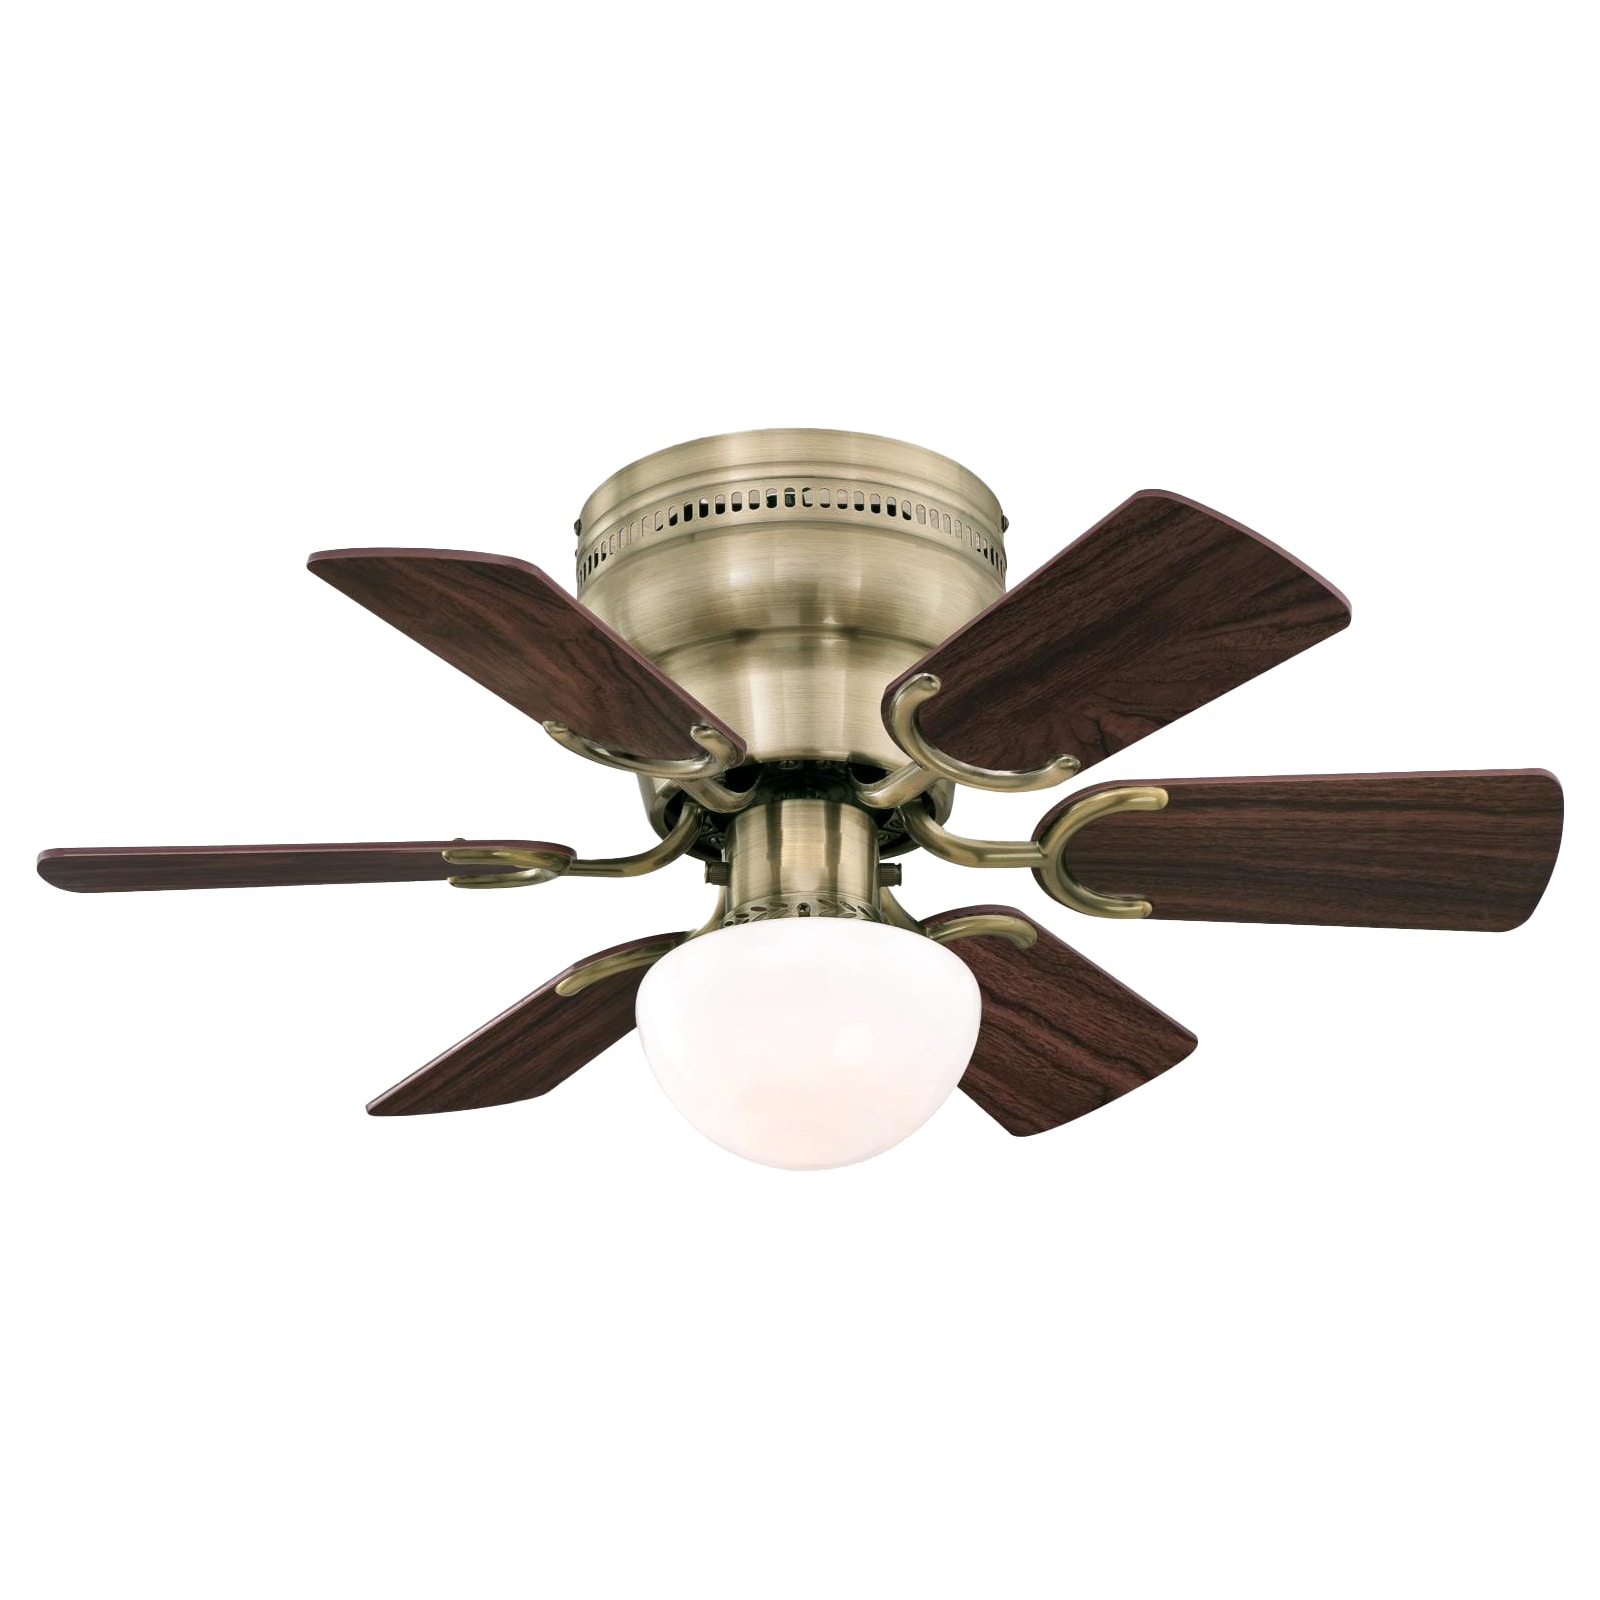 Ciata 30-in Antique Brass Indoor Ceiling Fan with Light (6-Blade 